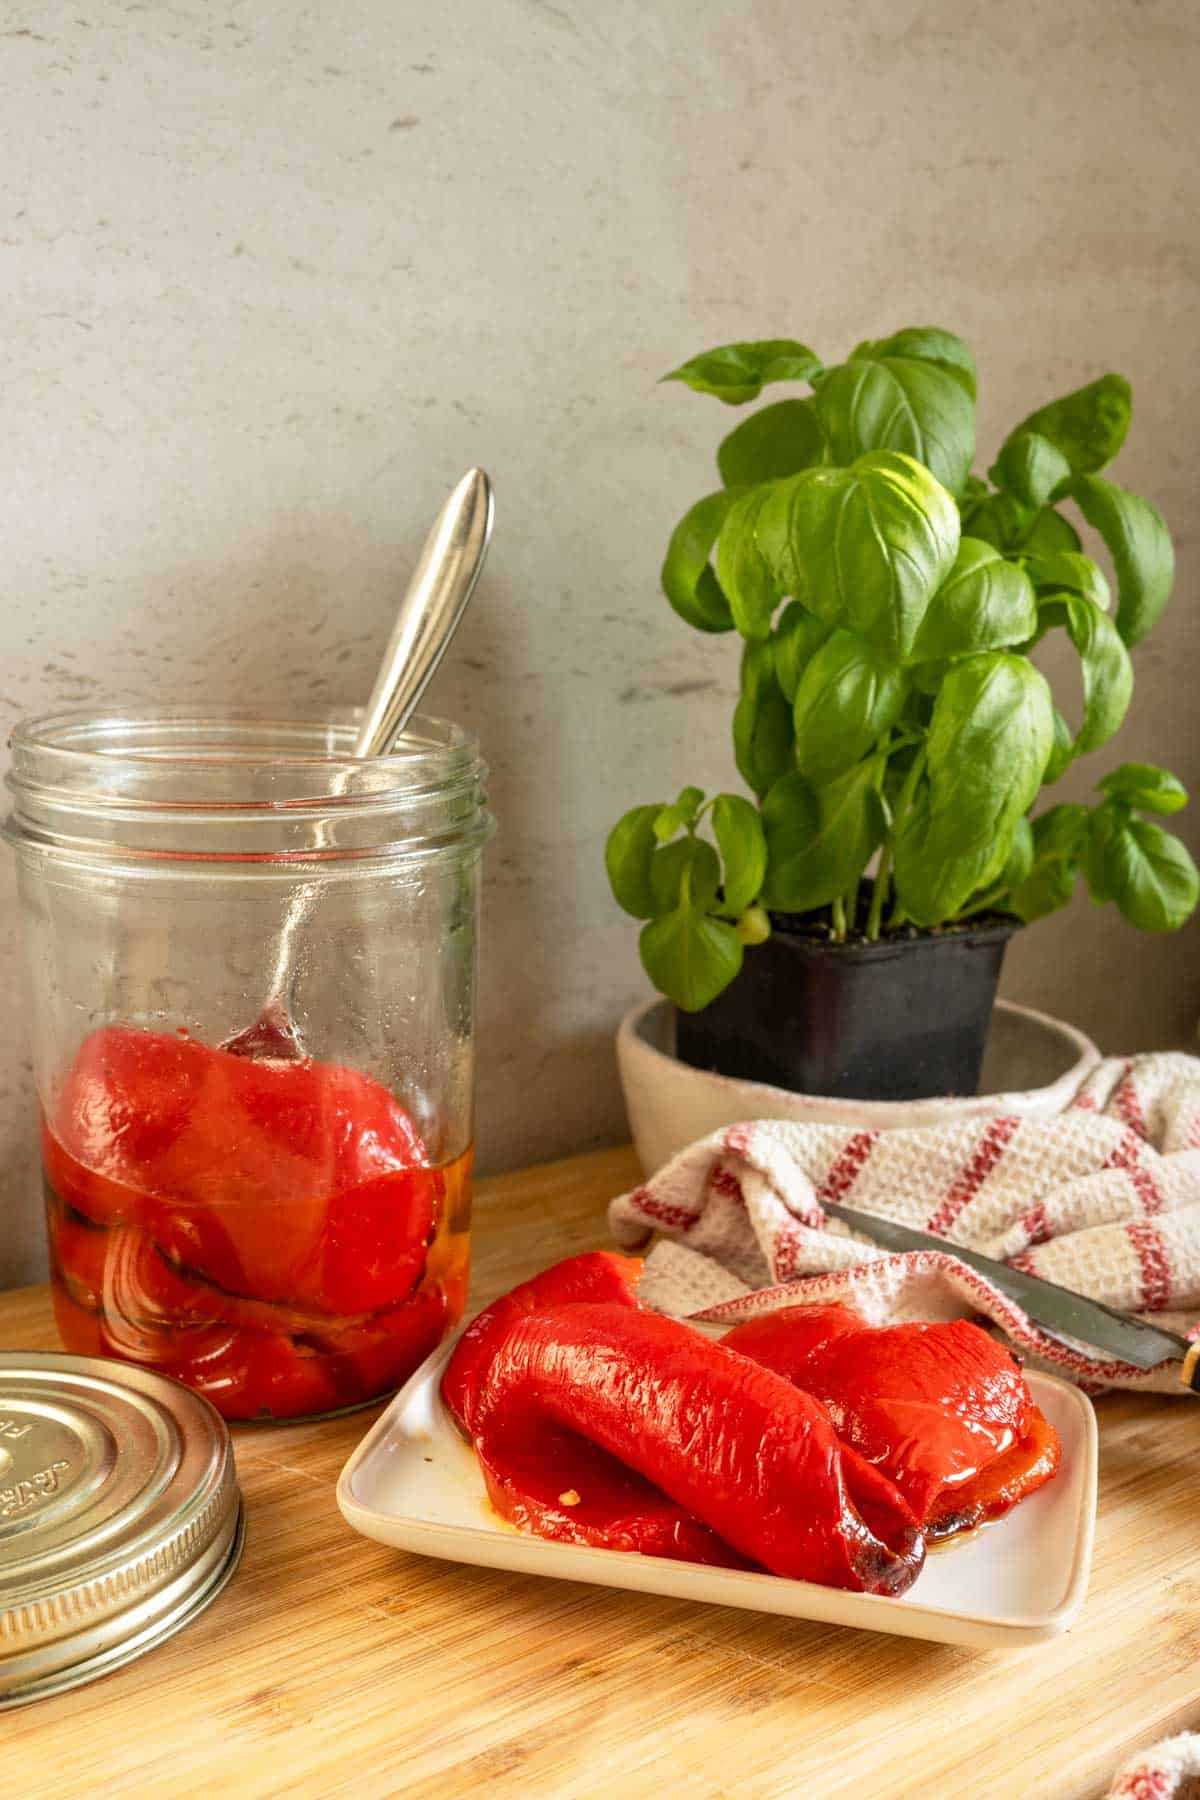 A jar of roasted red peppers with some on a plate and a basil plant beside on a wooden surface.